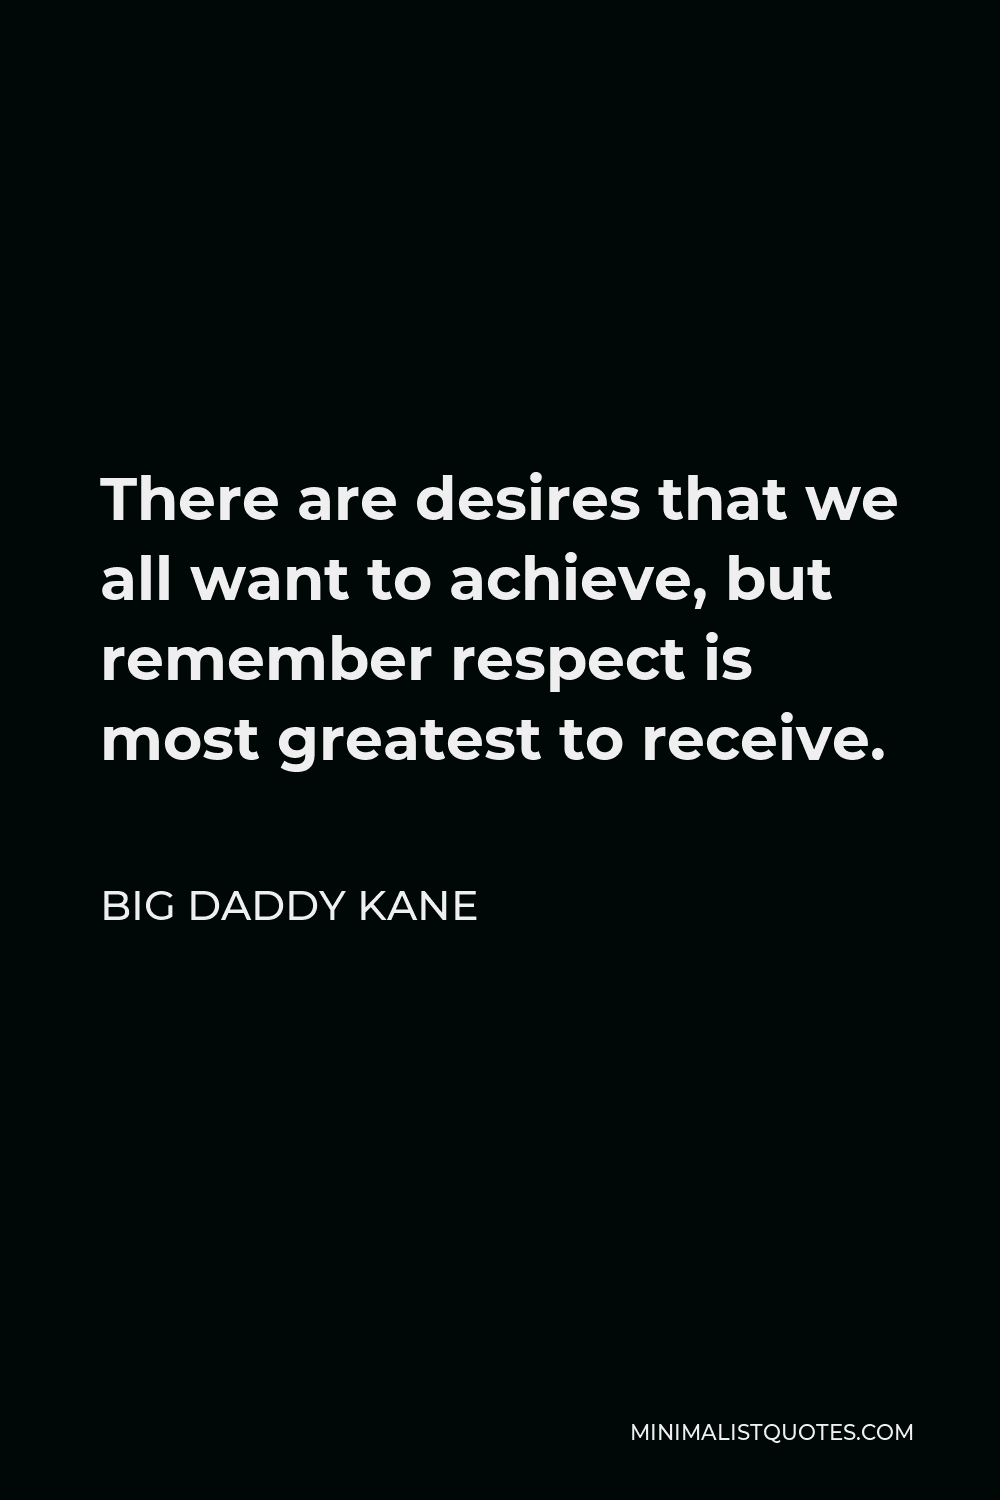 Big Daddy Kane Quote - There are desires that we all want to achieve, but remember respect is most greatest to receive.